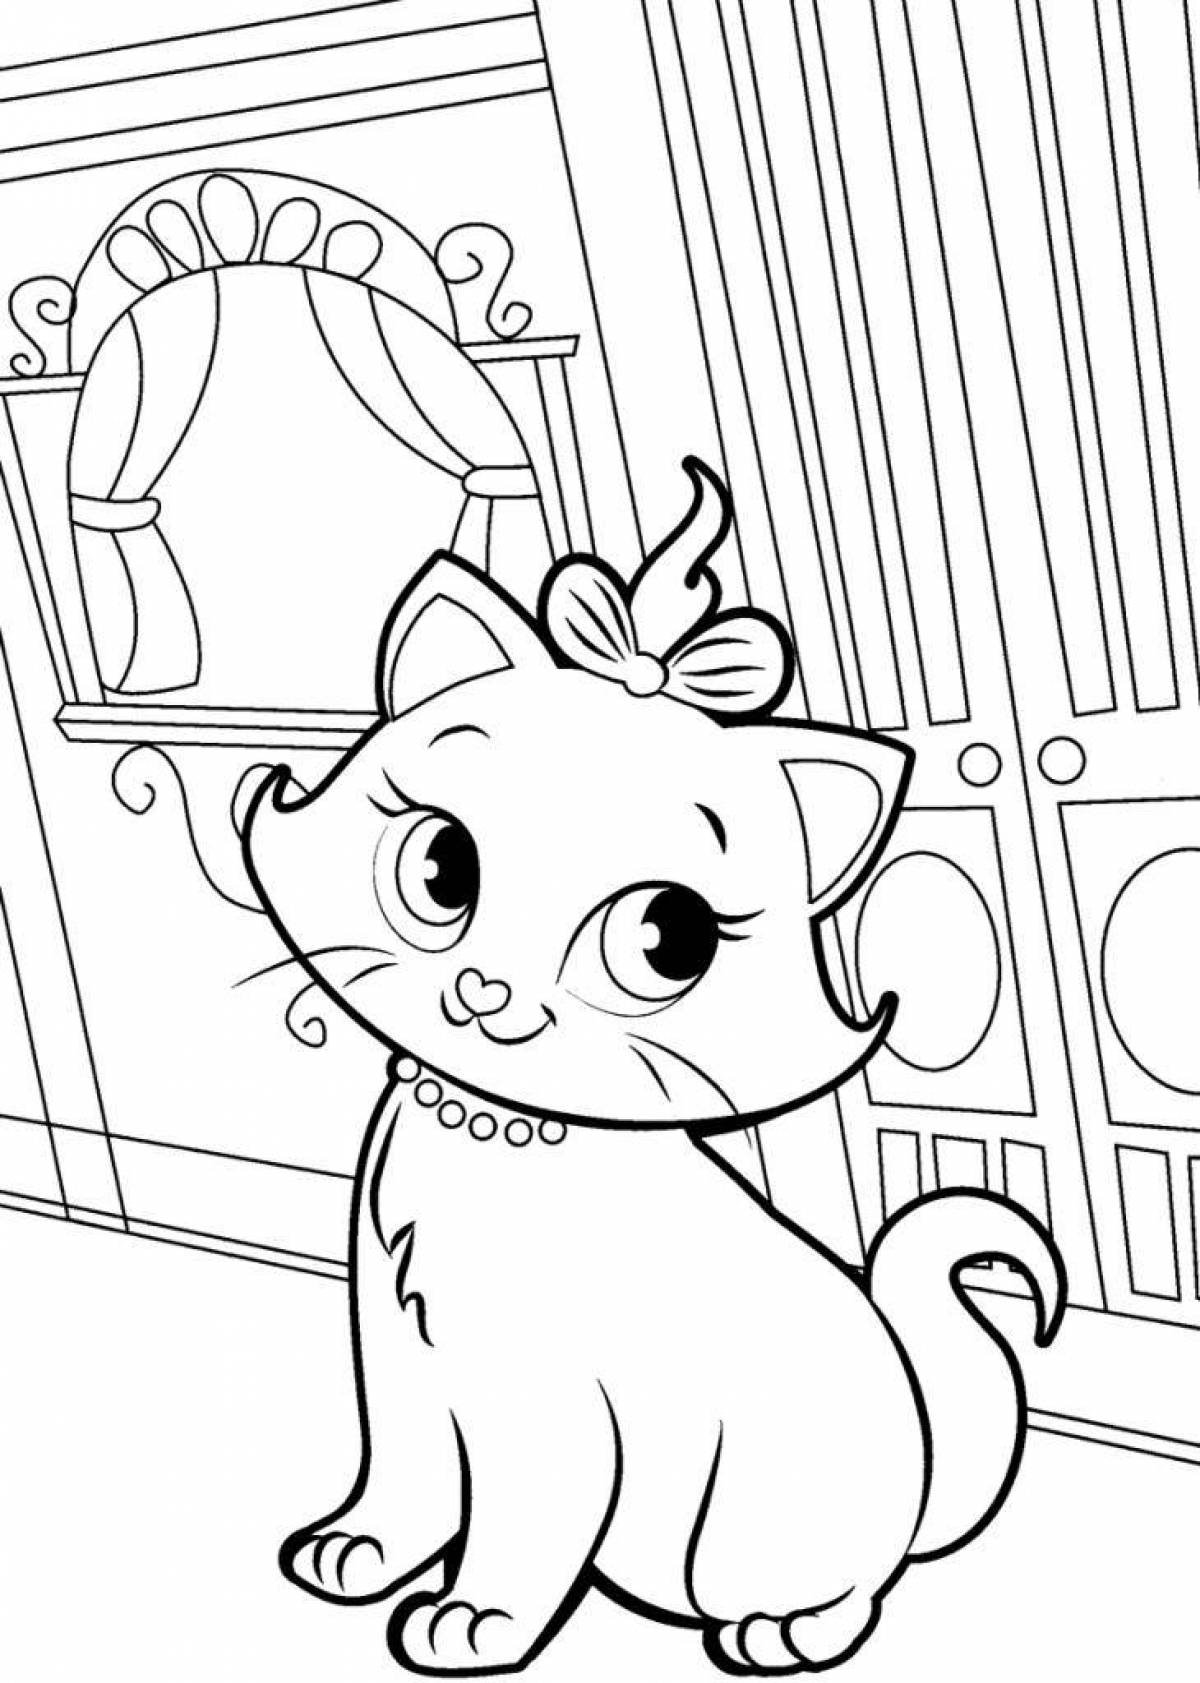 Fluffy cat coloring pages for girls